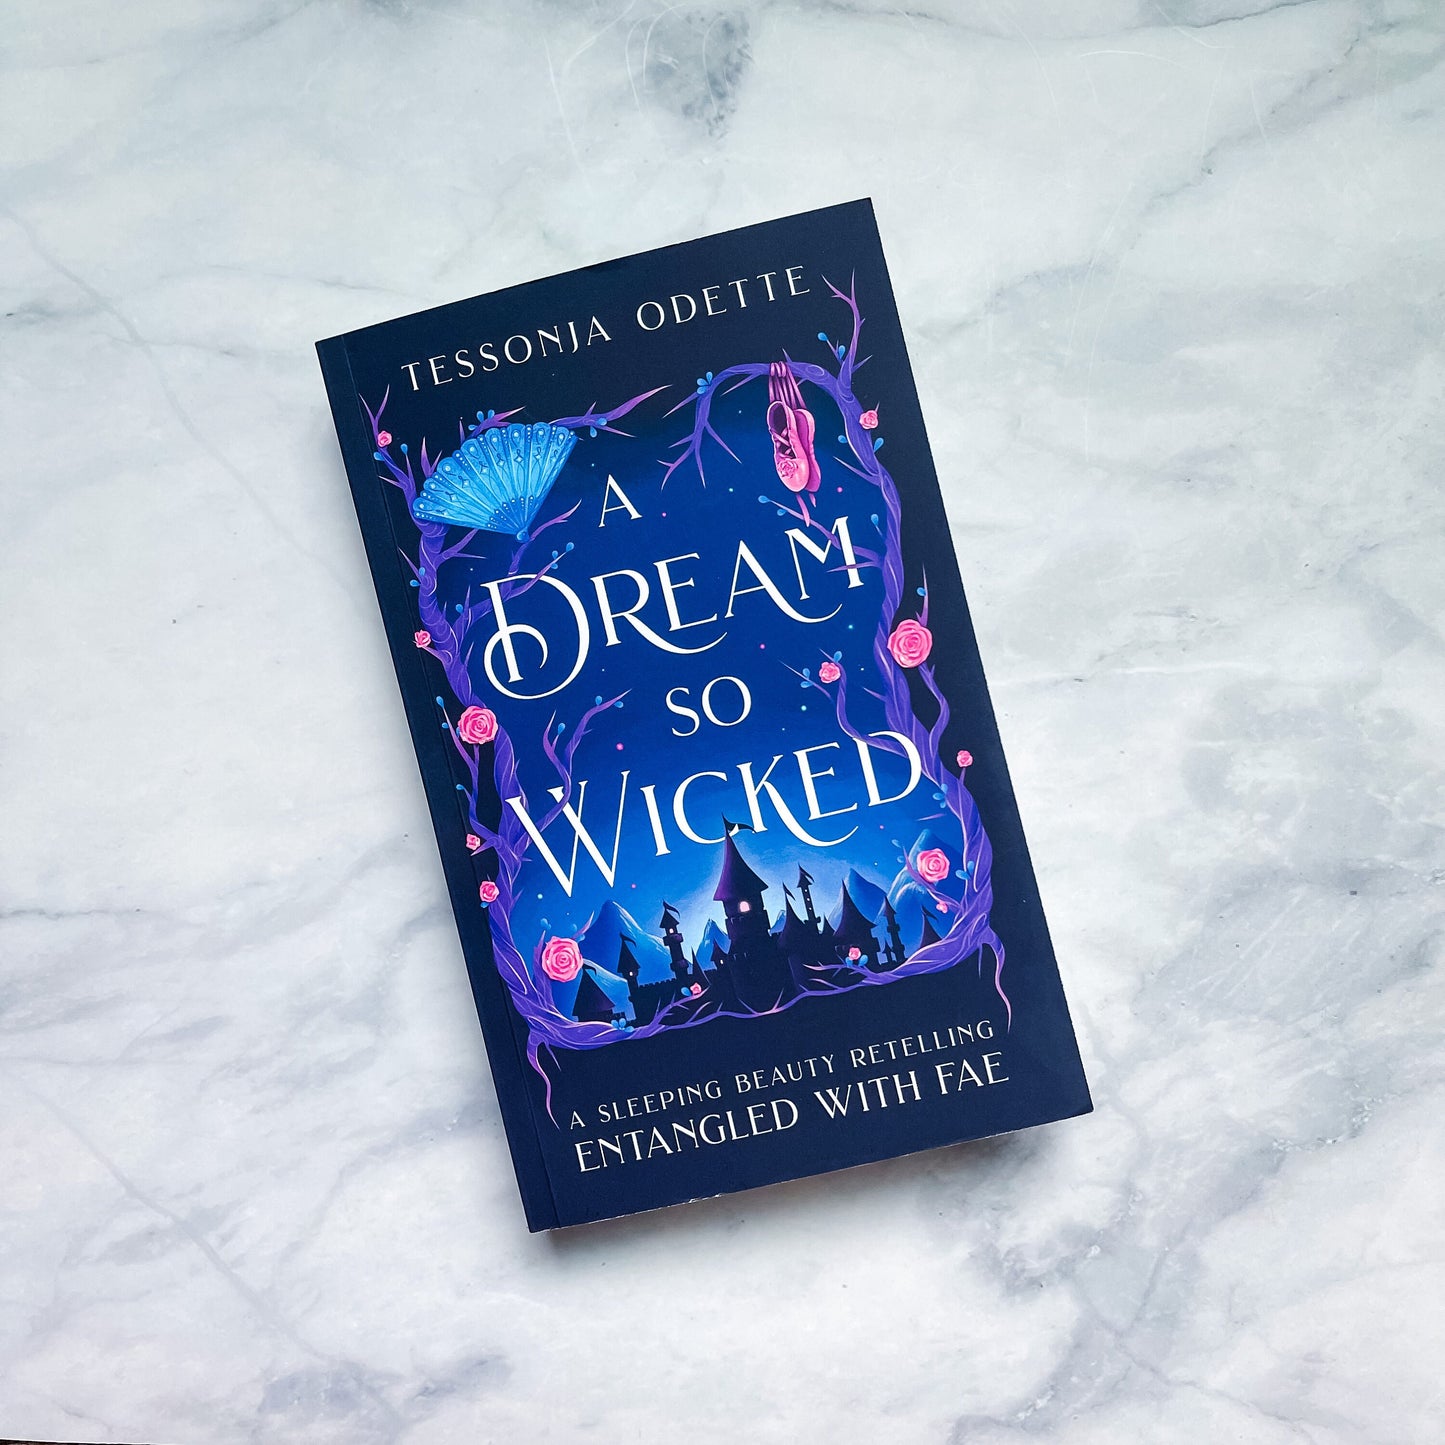 A Dream So Wicked (paperback) signed